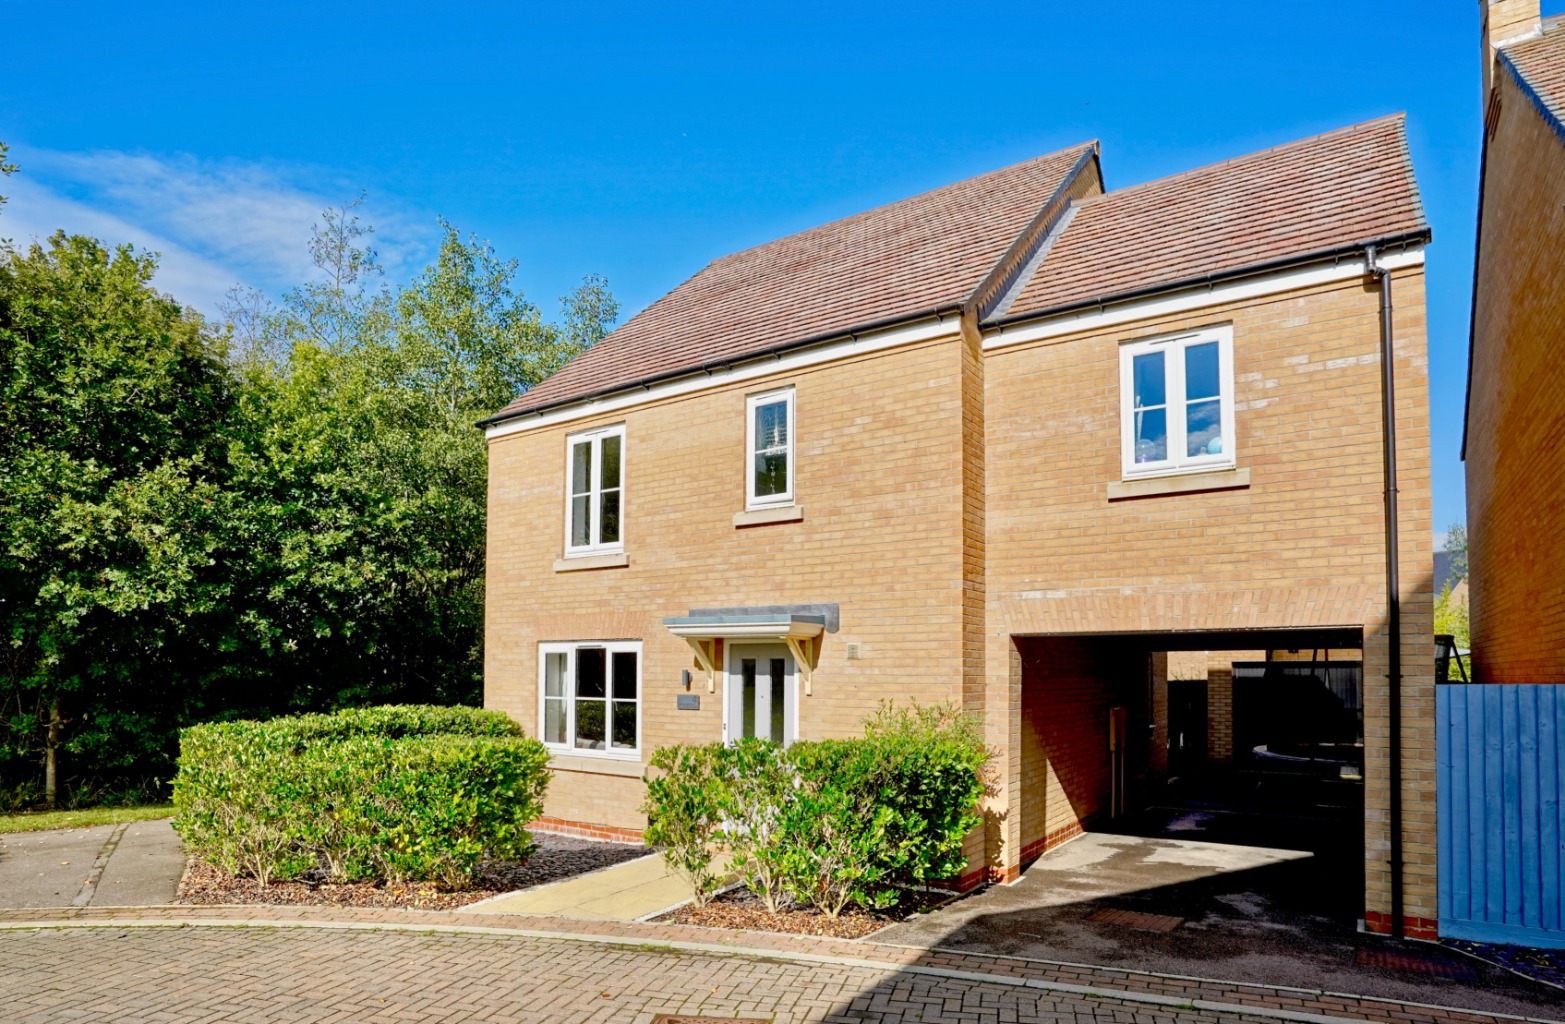 4 bed detached house for sale in Dairy Lane, Cambridge - Property Image 1